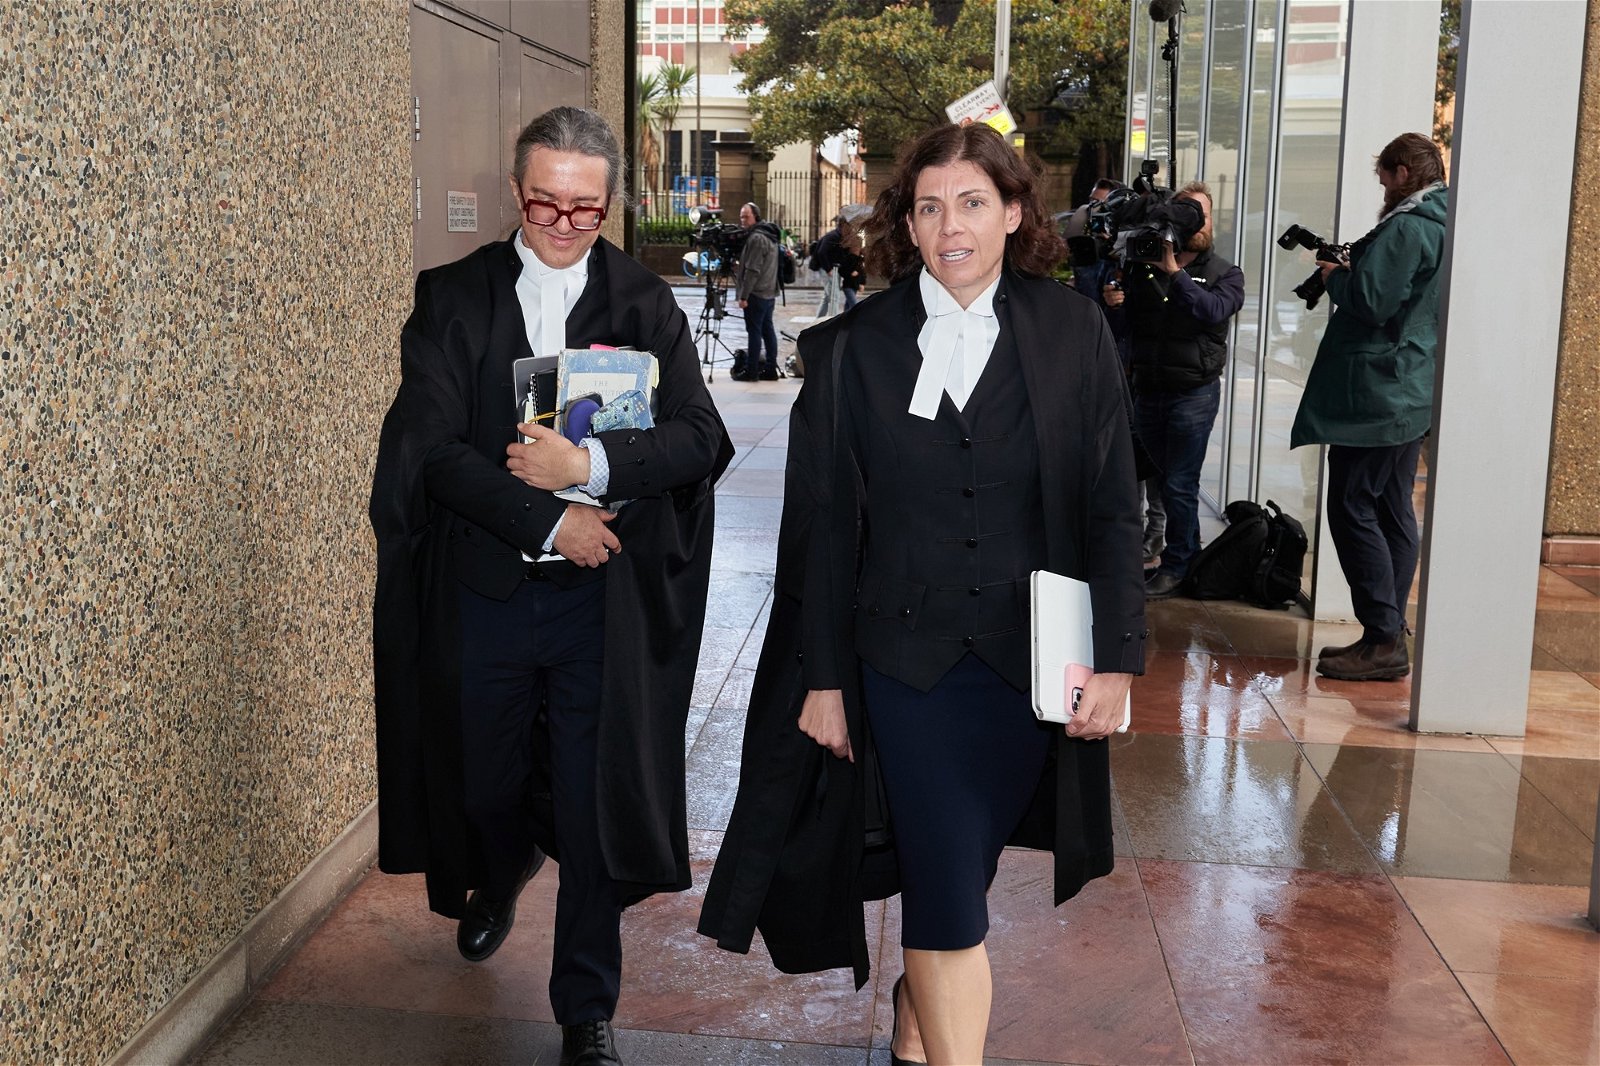 Barristers in robes leave court